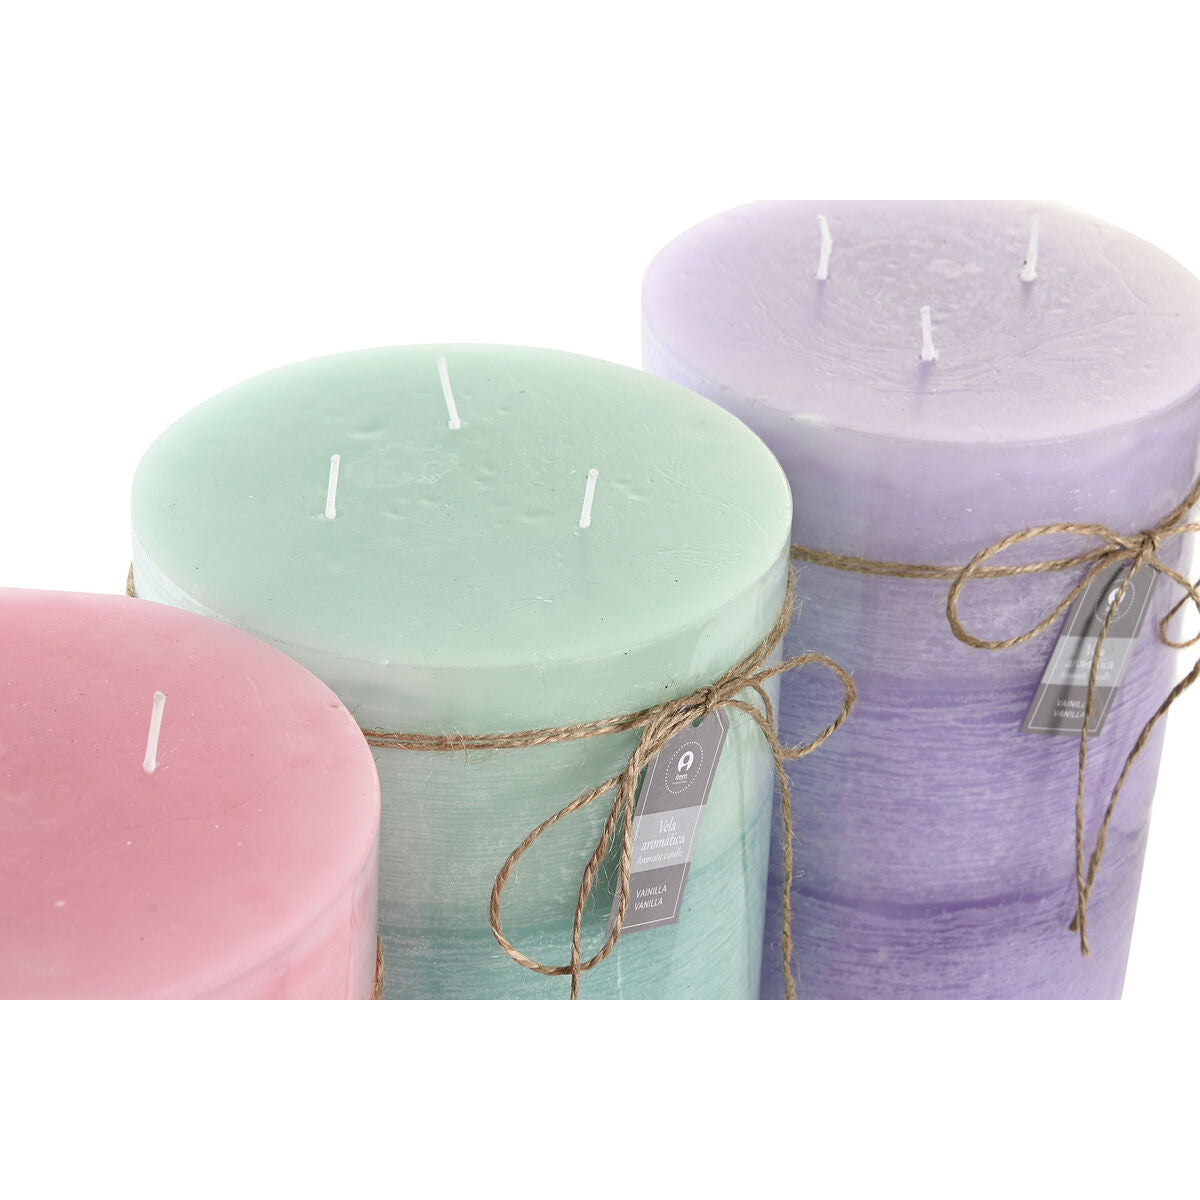 DKD Home Decor Scented Candle (3 Units)